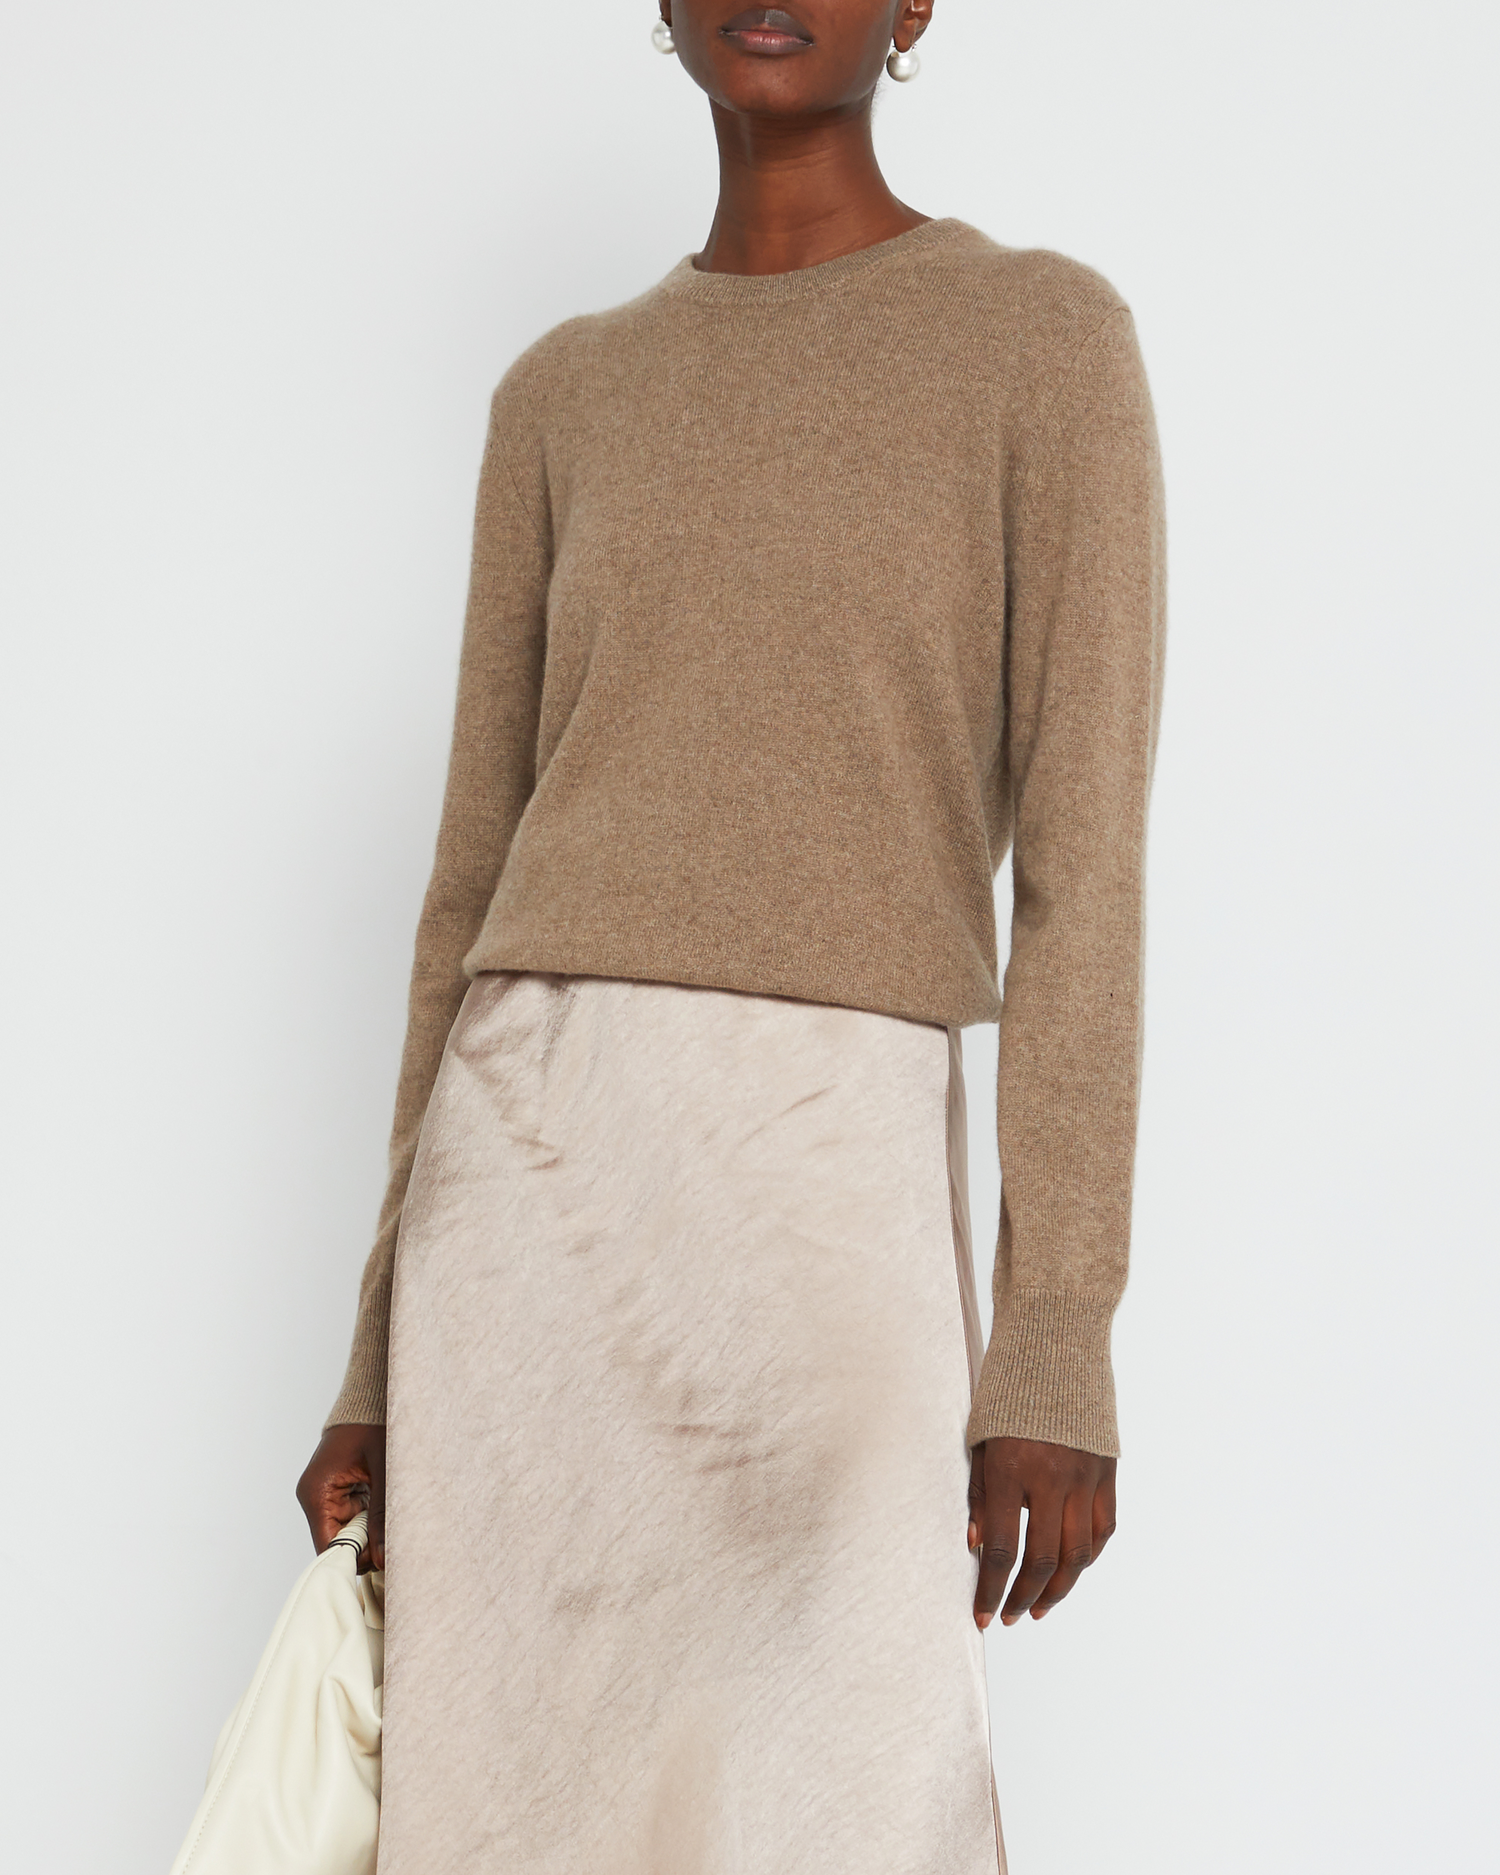 The $50 Cashmere V-Neck Sweater